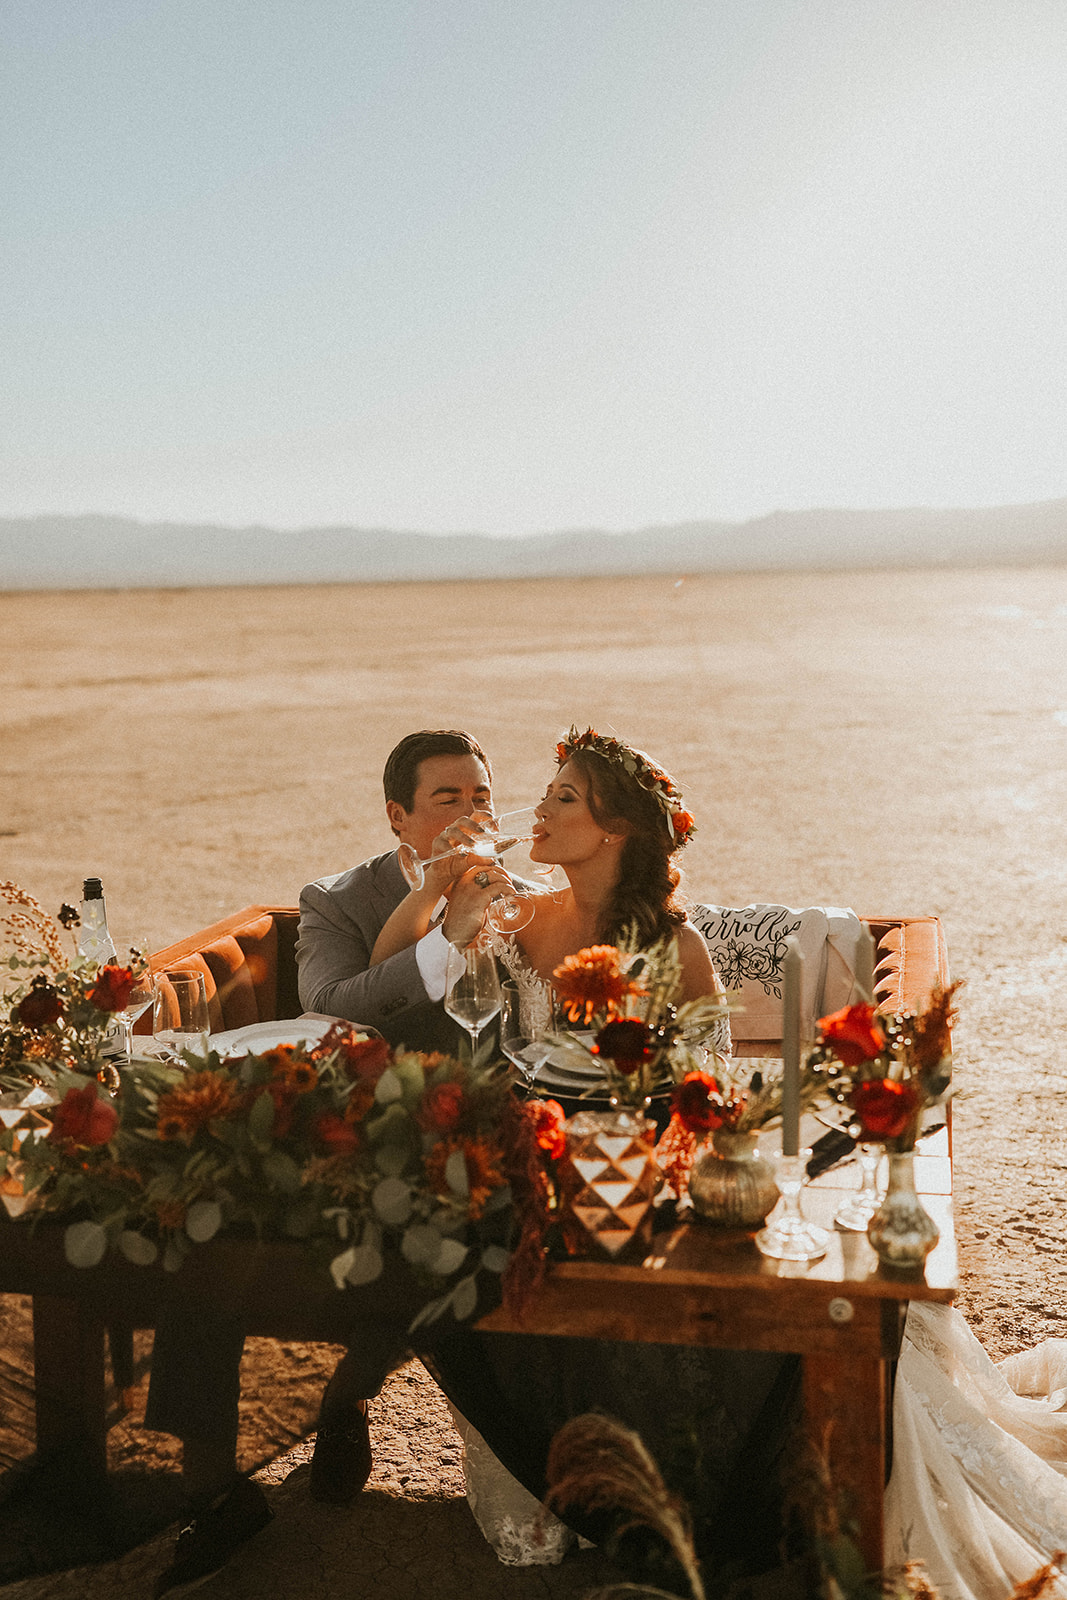 Newlyweds Drinking Champagne while Sitting at Dry Lake Bed Fall Inspired Elopement Sweetheart Table with Velvet Couch & Fall Inspired Floral 